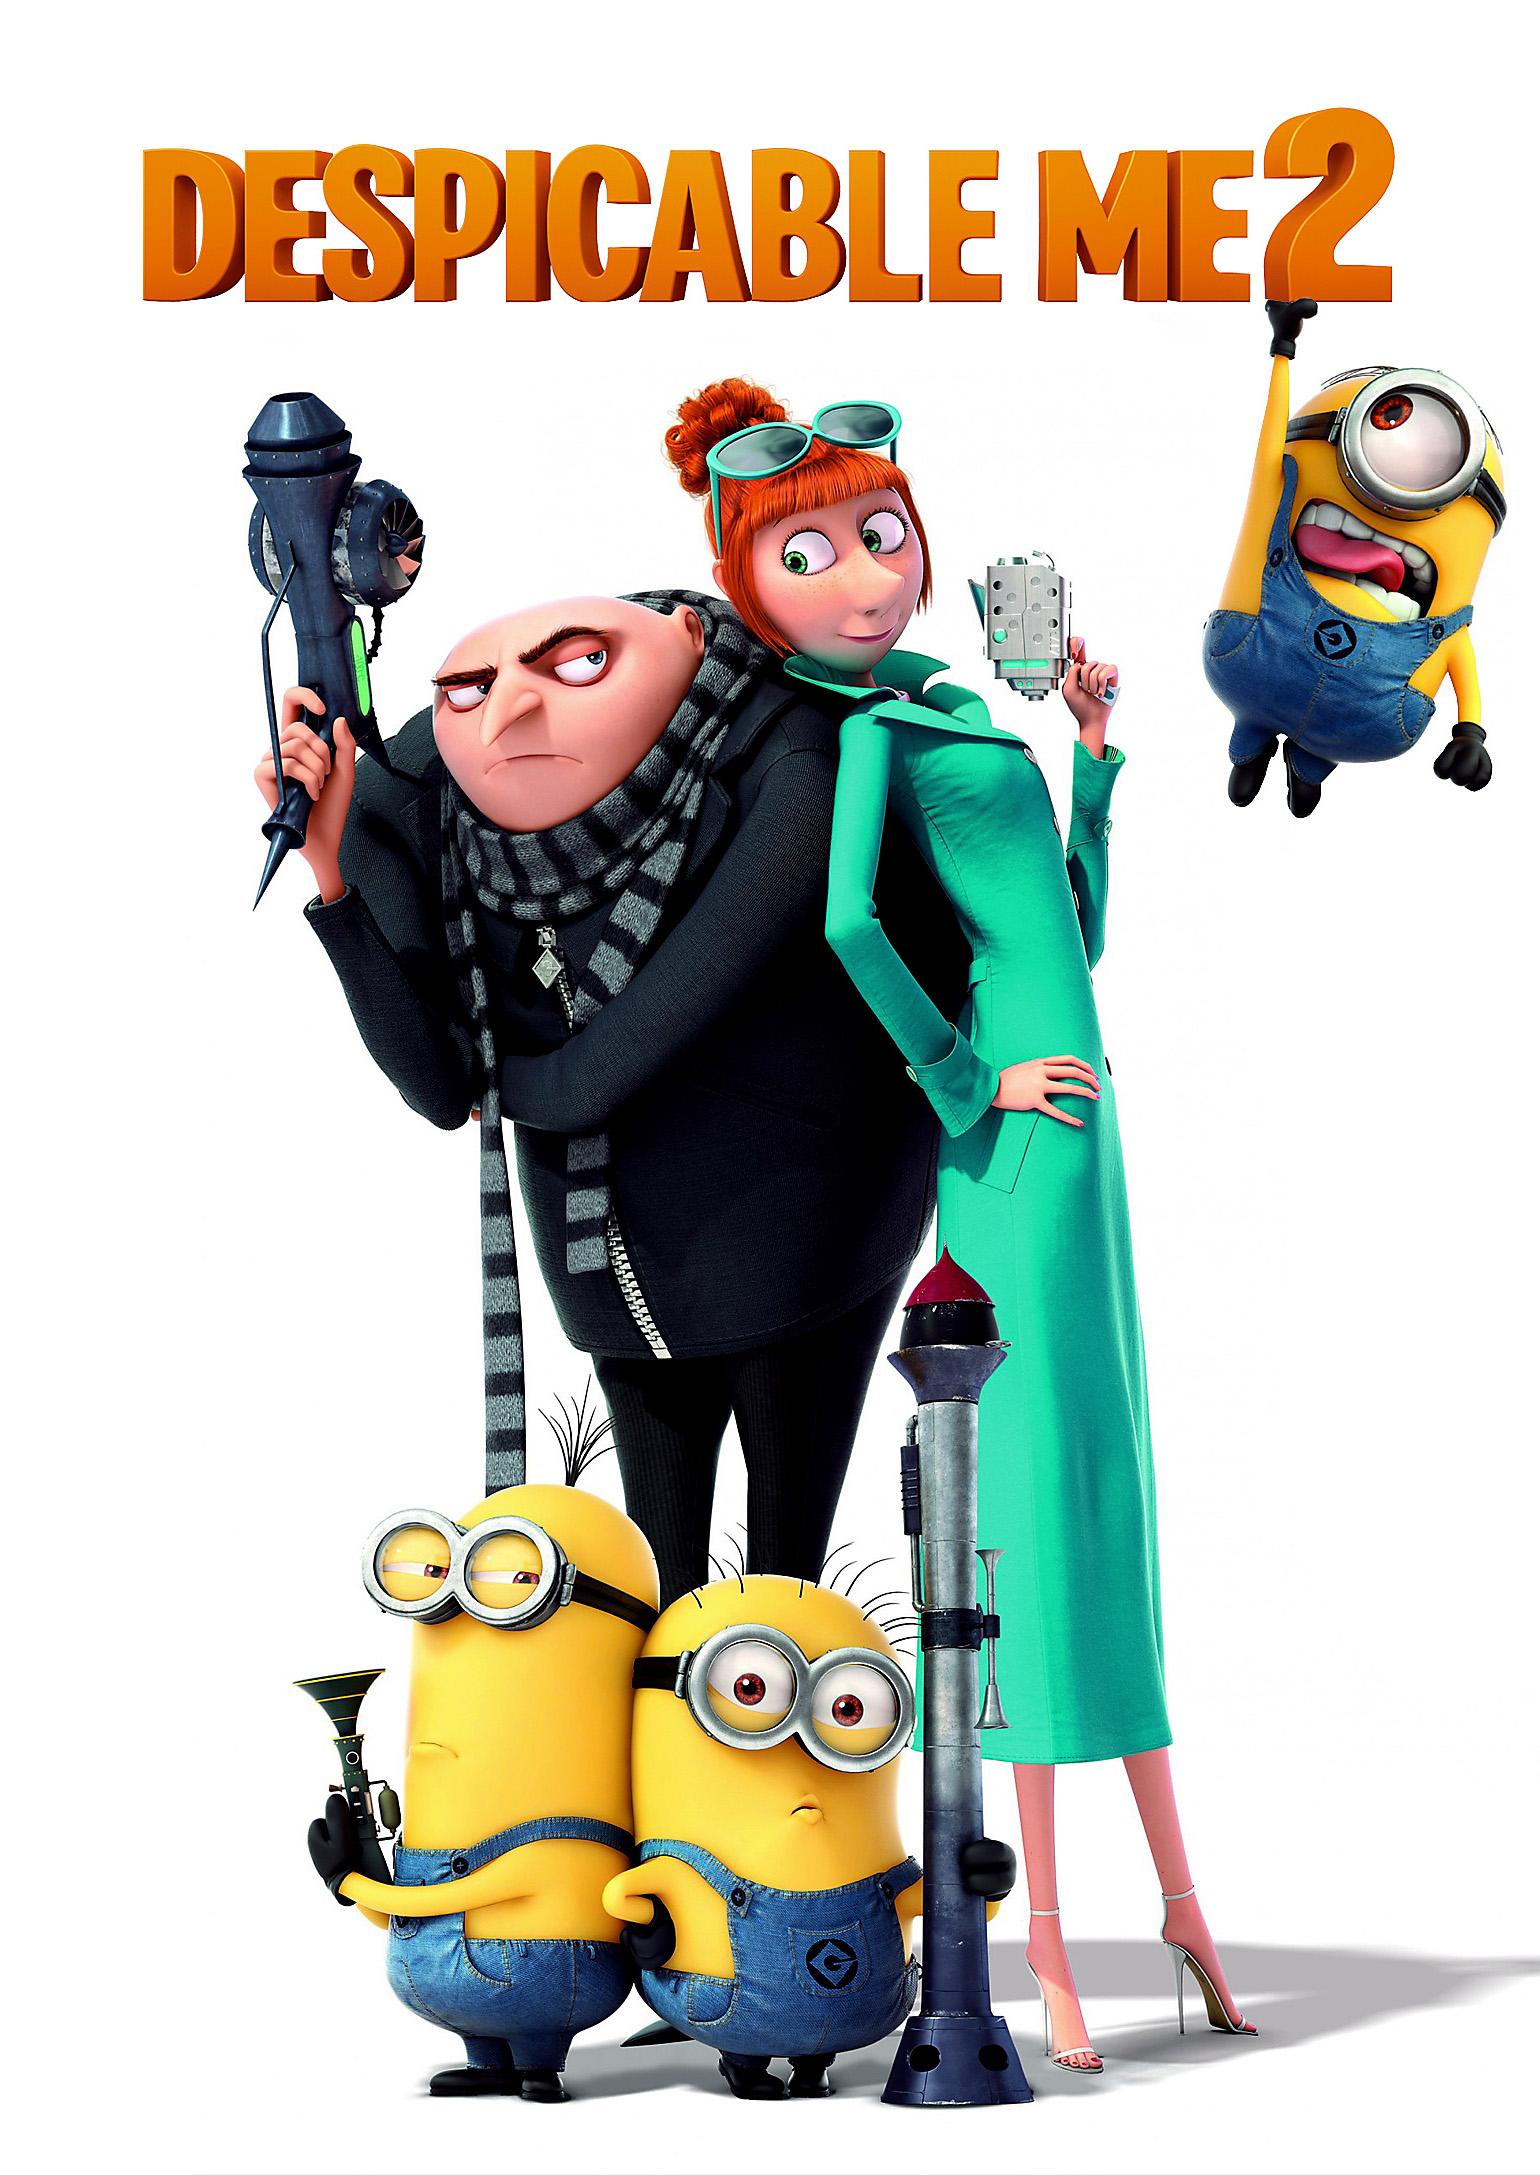 https://rozup.ir/up/forooshgahnet/Pictures/MOVIE-PIC/Despicable-me-2-dvd-cover-large.jpg